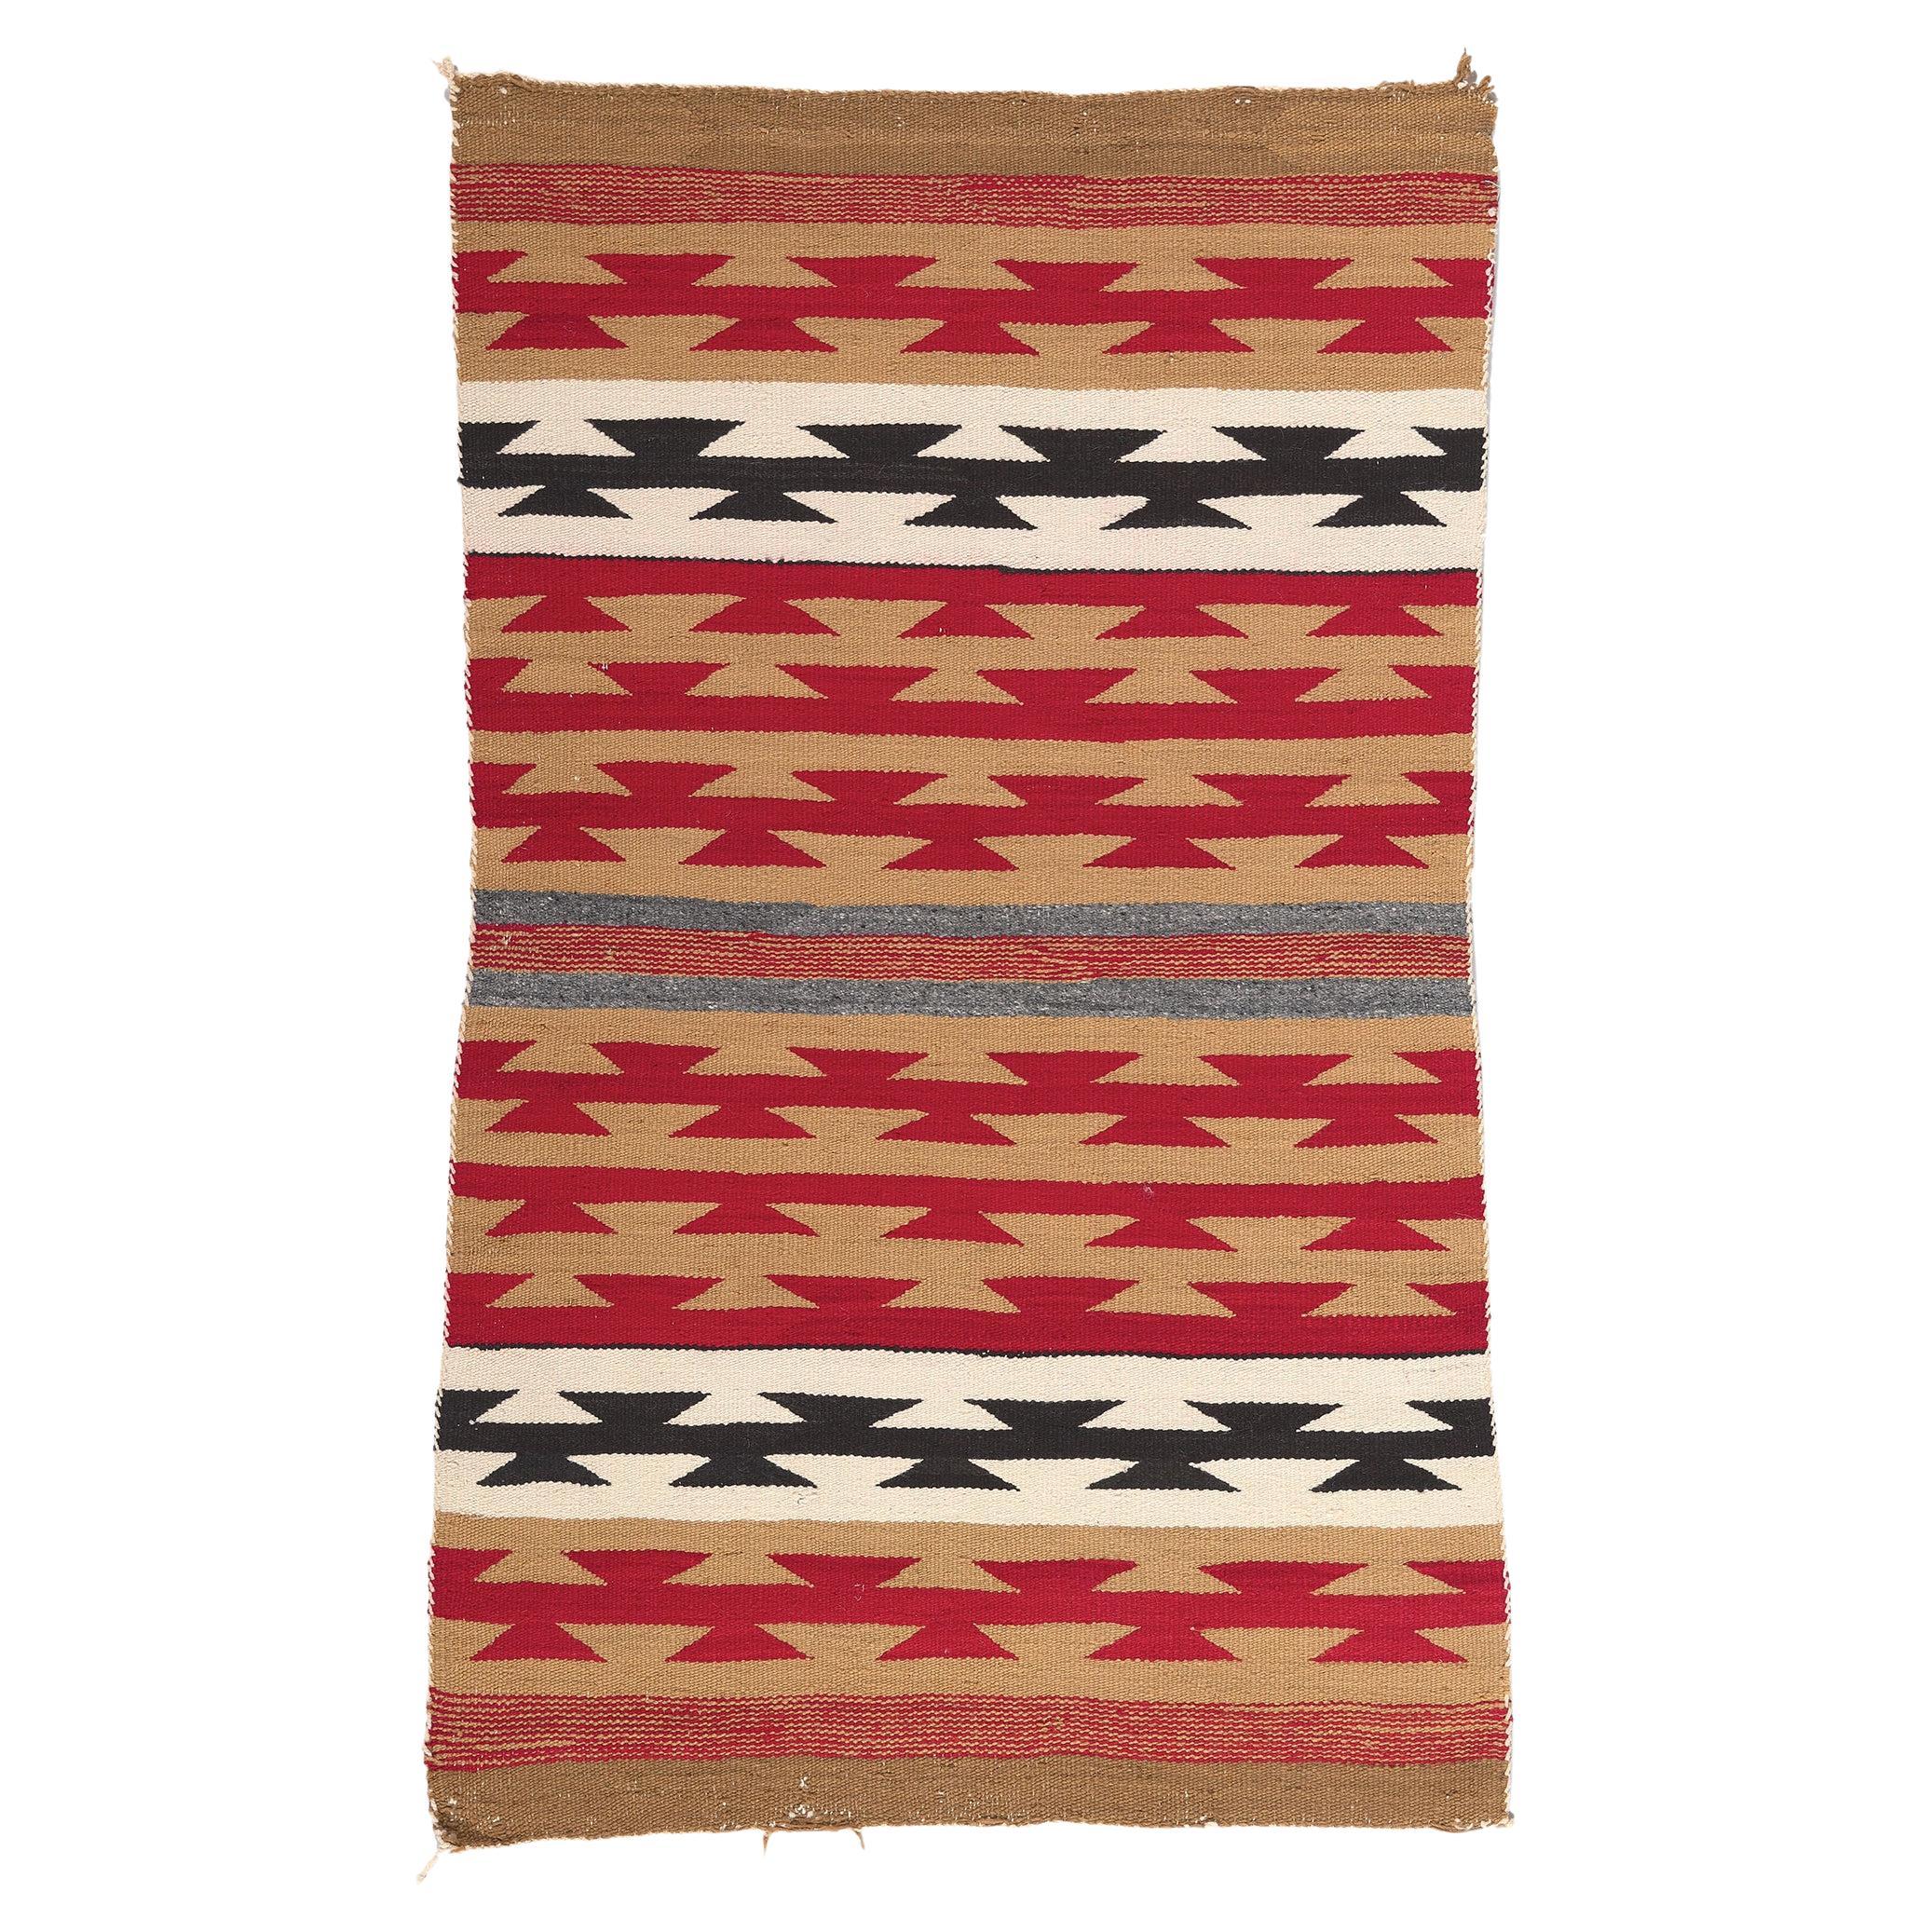 Antique Chinle Navajo Rug, Southwest Style Meets Native American